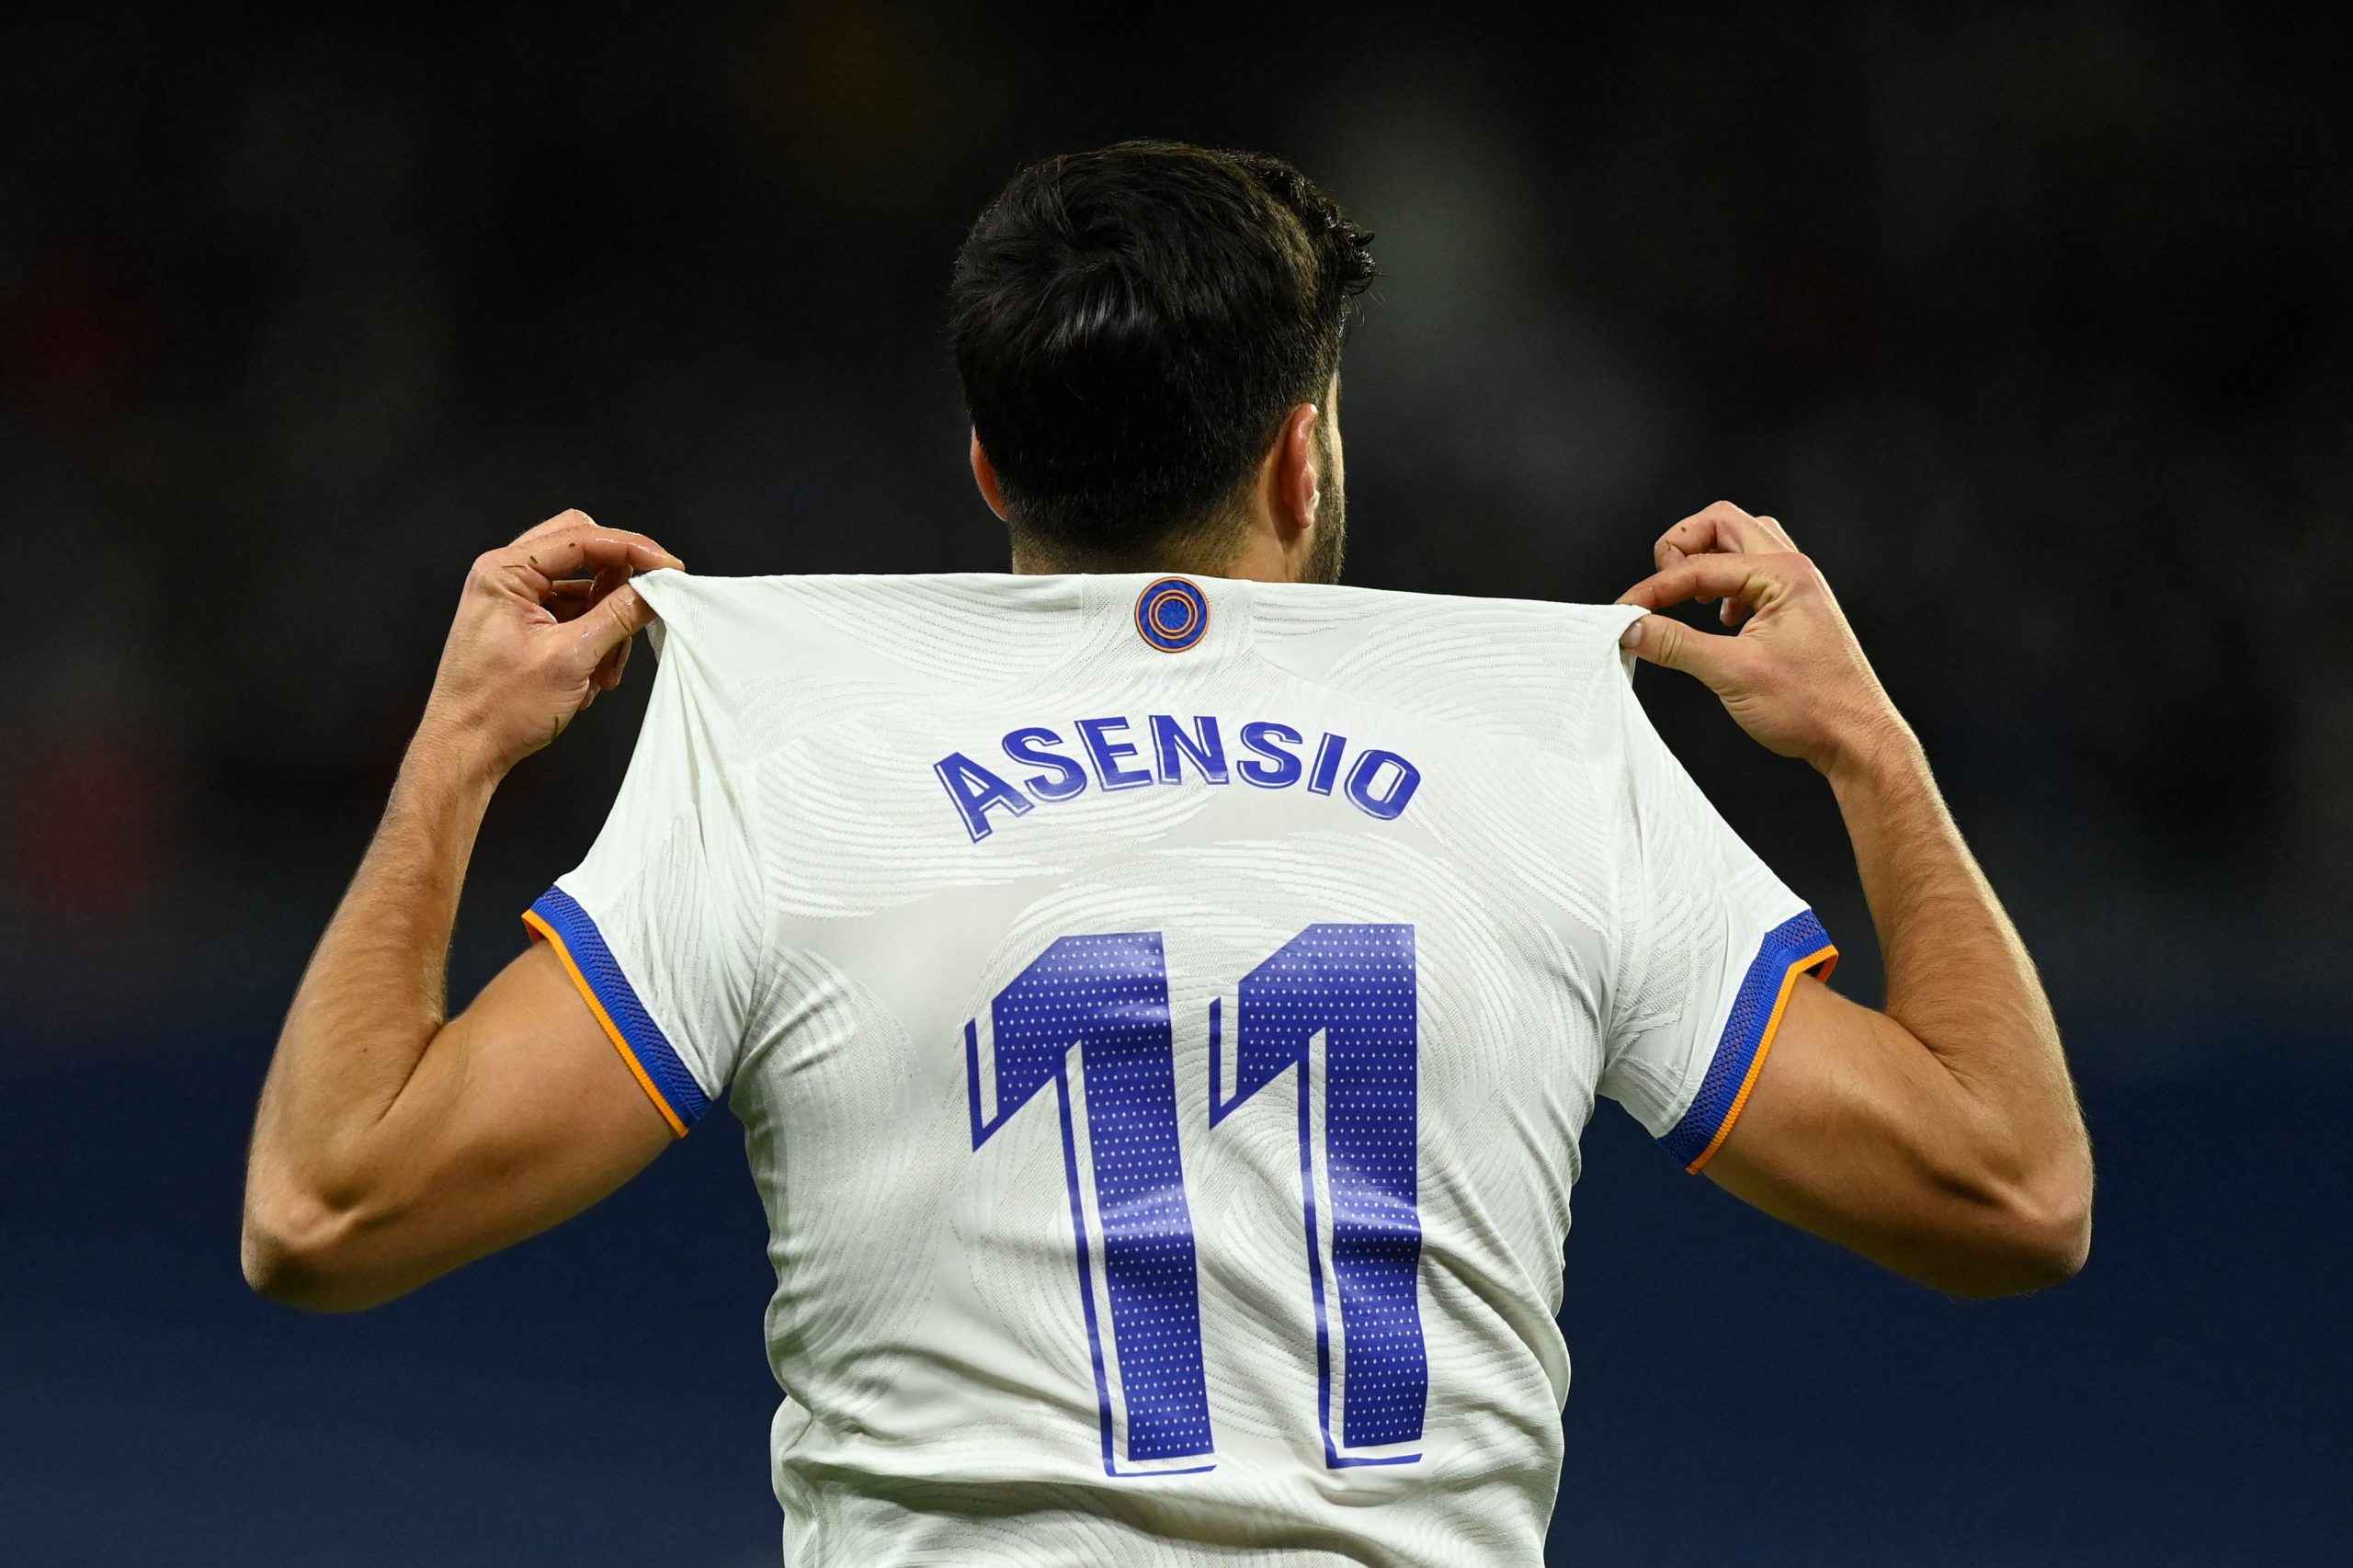 AC Milan optimistic about beating Tottenham Hotspur to sign Real Madrid star Marco Asensio.